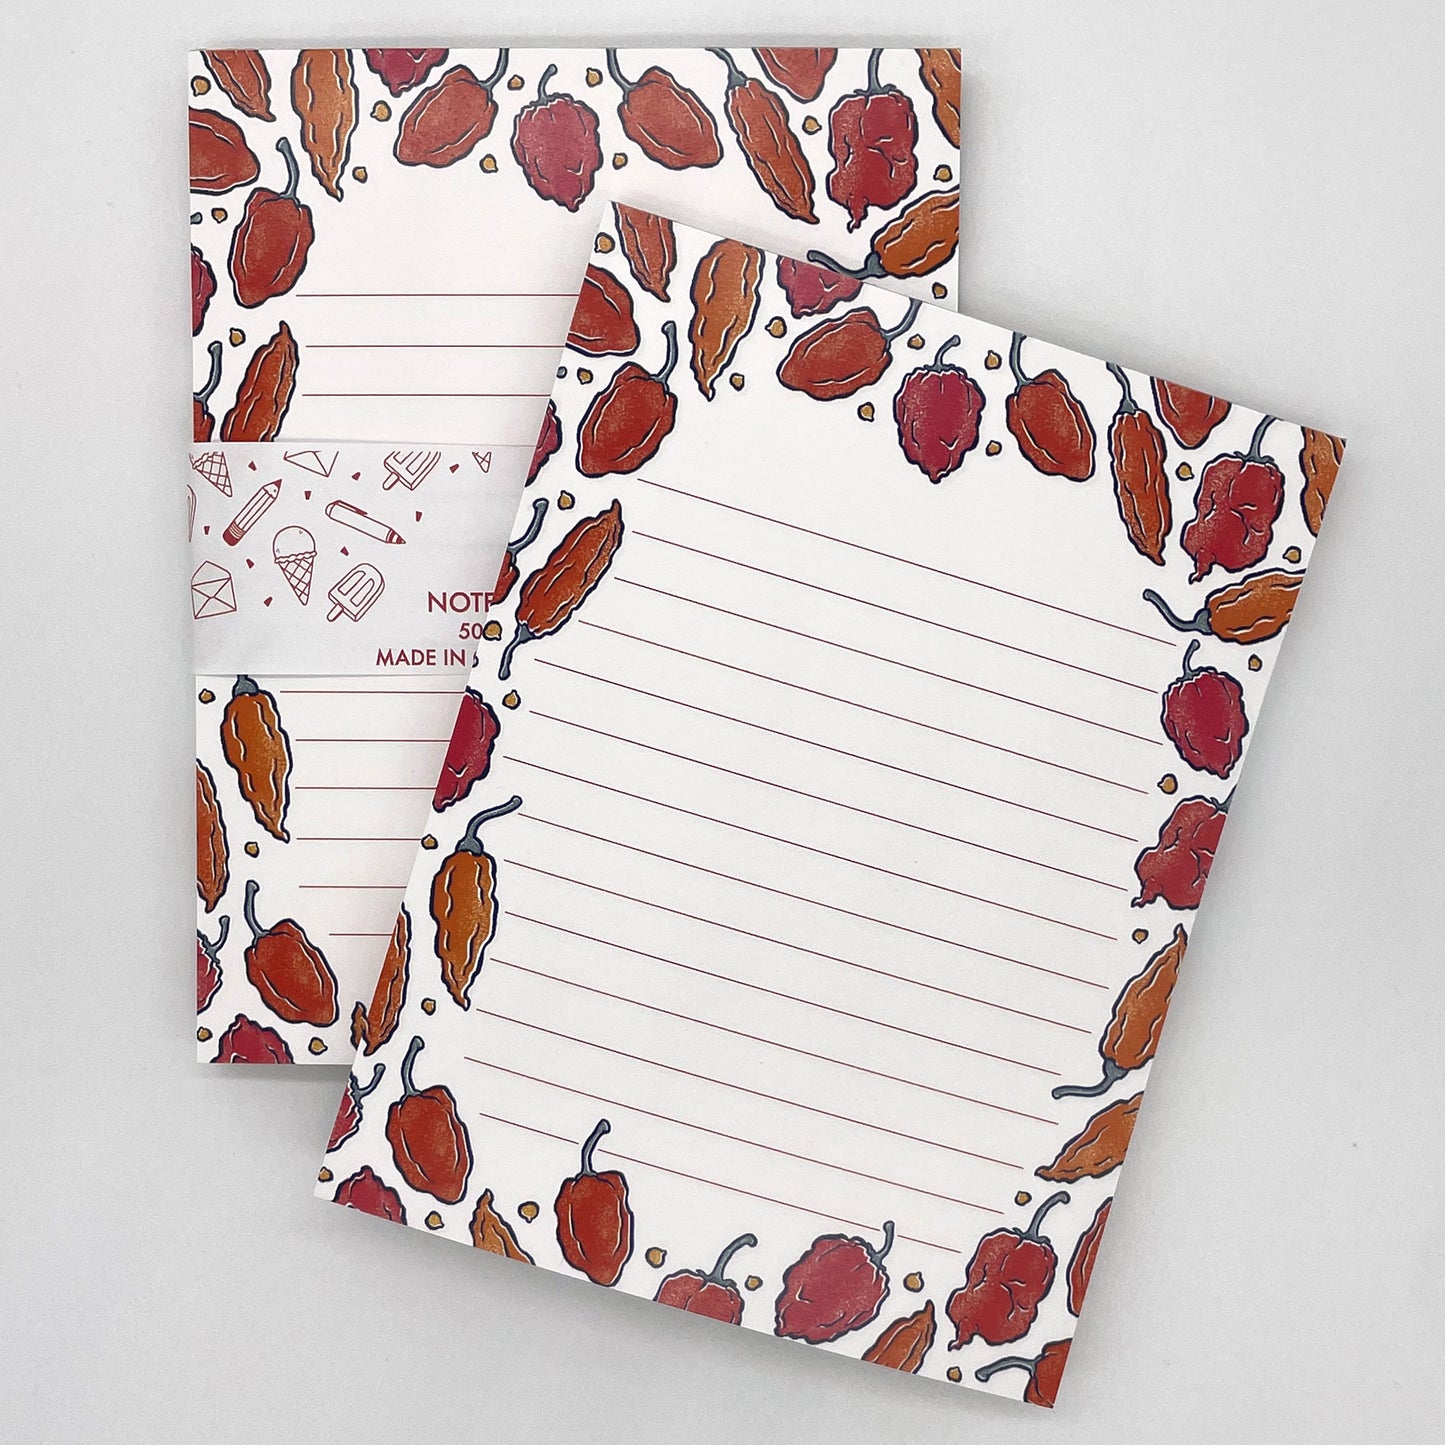 A pair of white lined notepads feature illustrations of hot peppers in orange and red. The back notepad is packaged in a belly band indicating that the notepad is 50 pages and made in Canada.